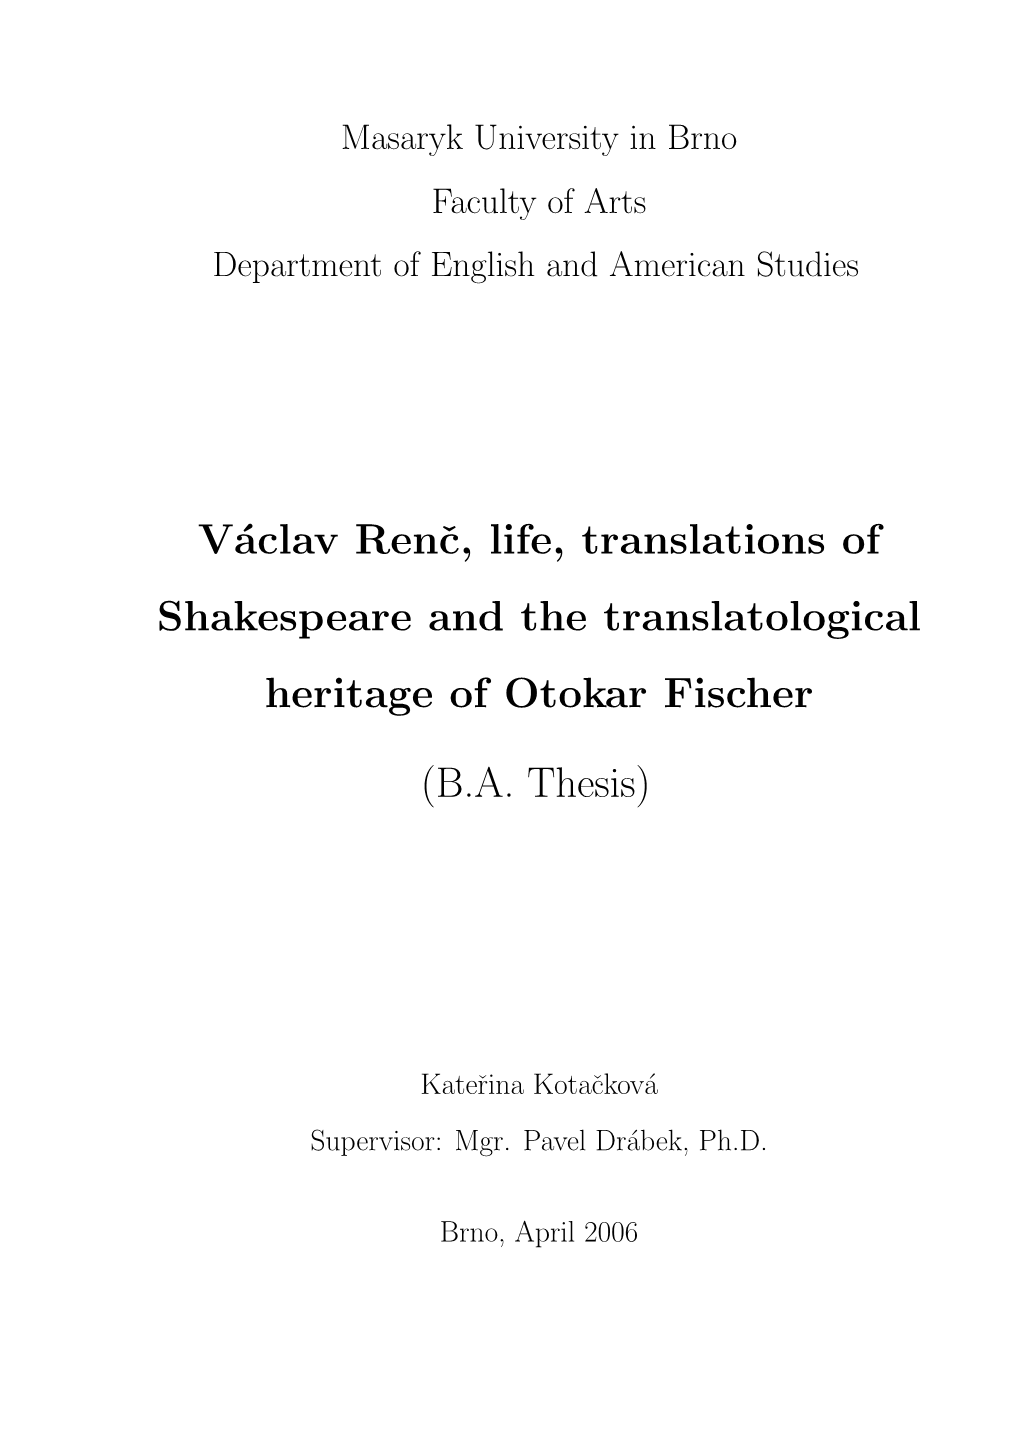 Václav Renc, Life, Translations of Shakespeare and The